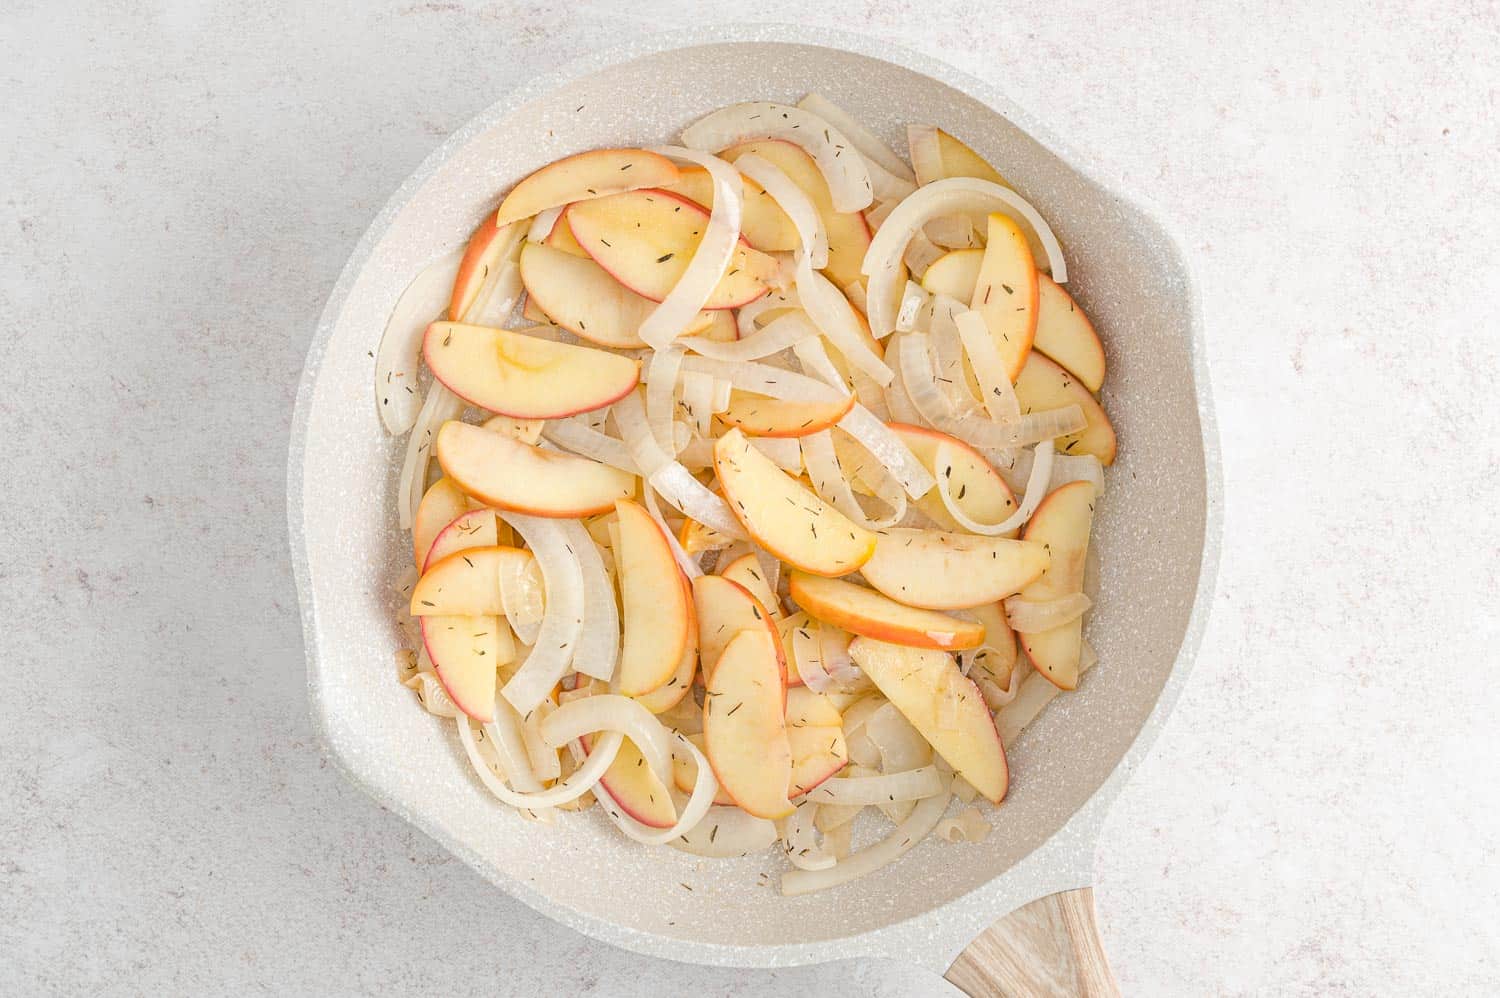 Apples and onions in a frying pan.